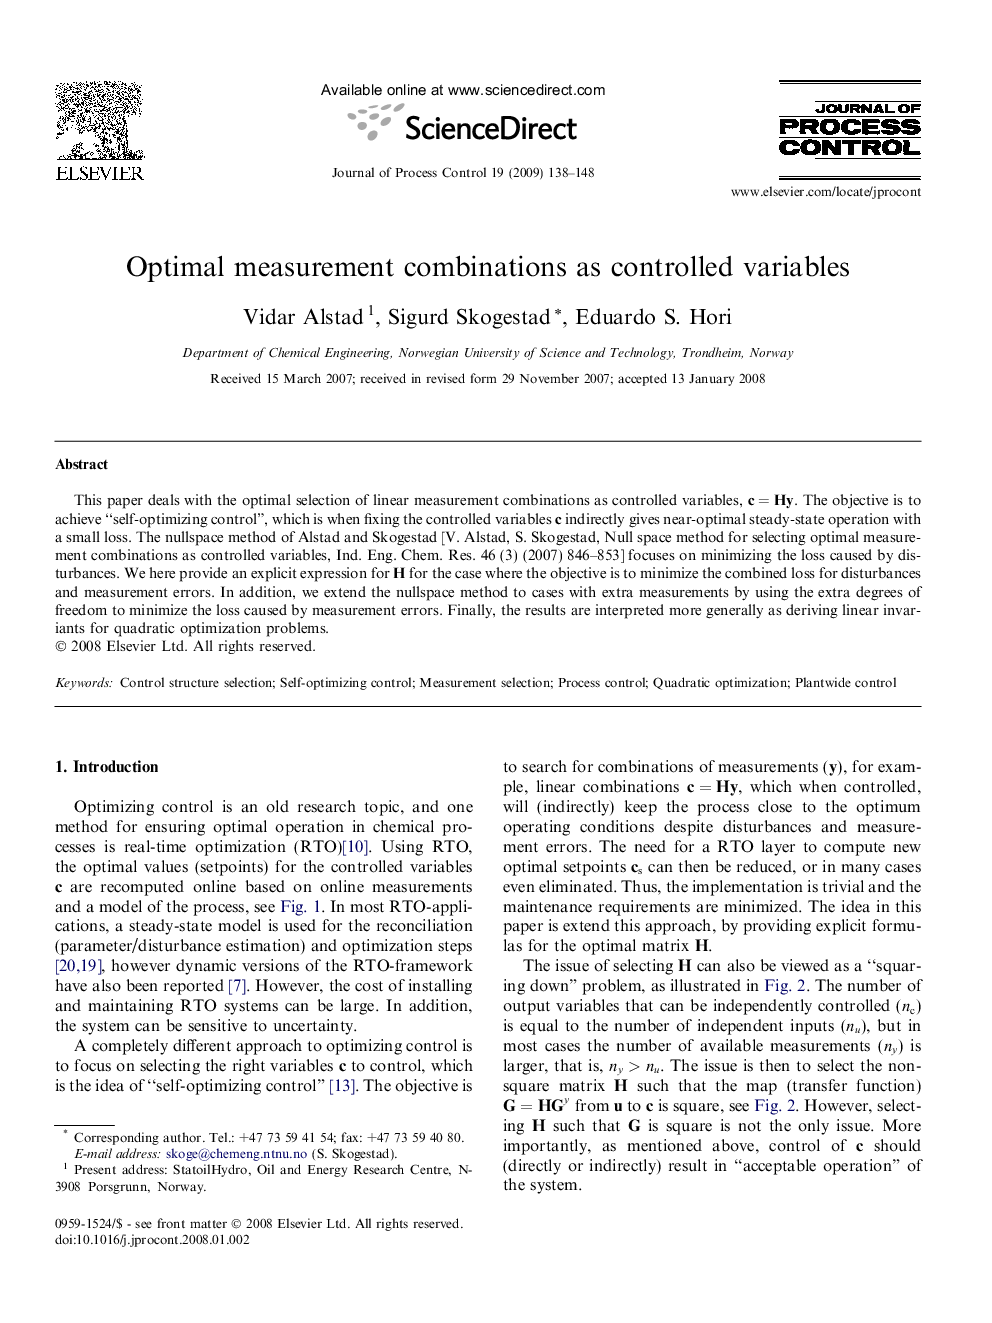 Optimal measurement combinations as controlled variables